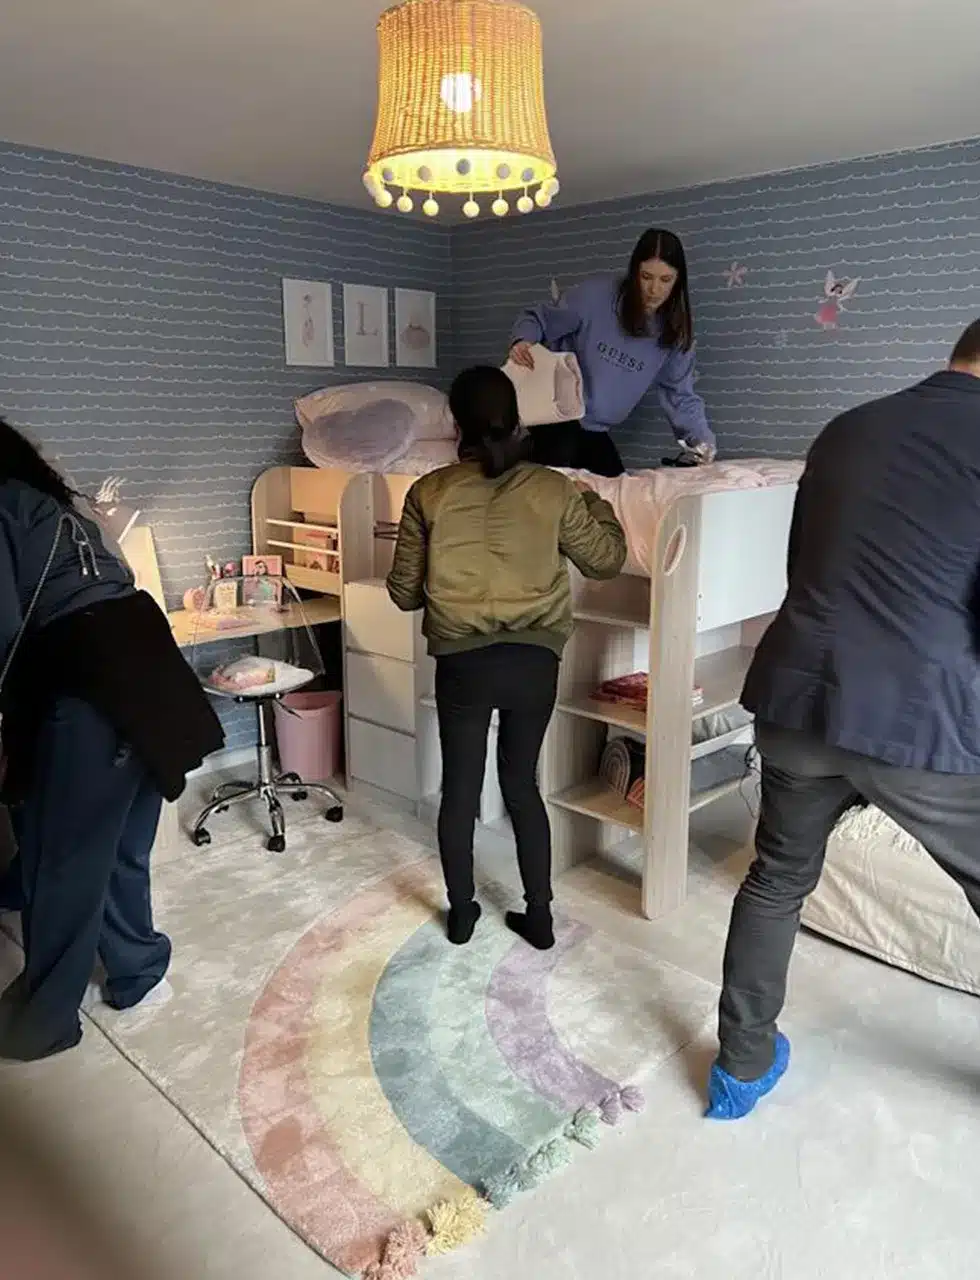 The team working on child's room designed by Katharine Pooleys interior design team, as part of charity project Decorate a Childs Life by The Childhood Trust